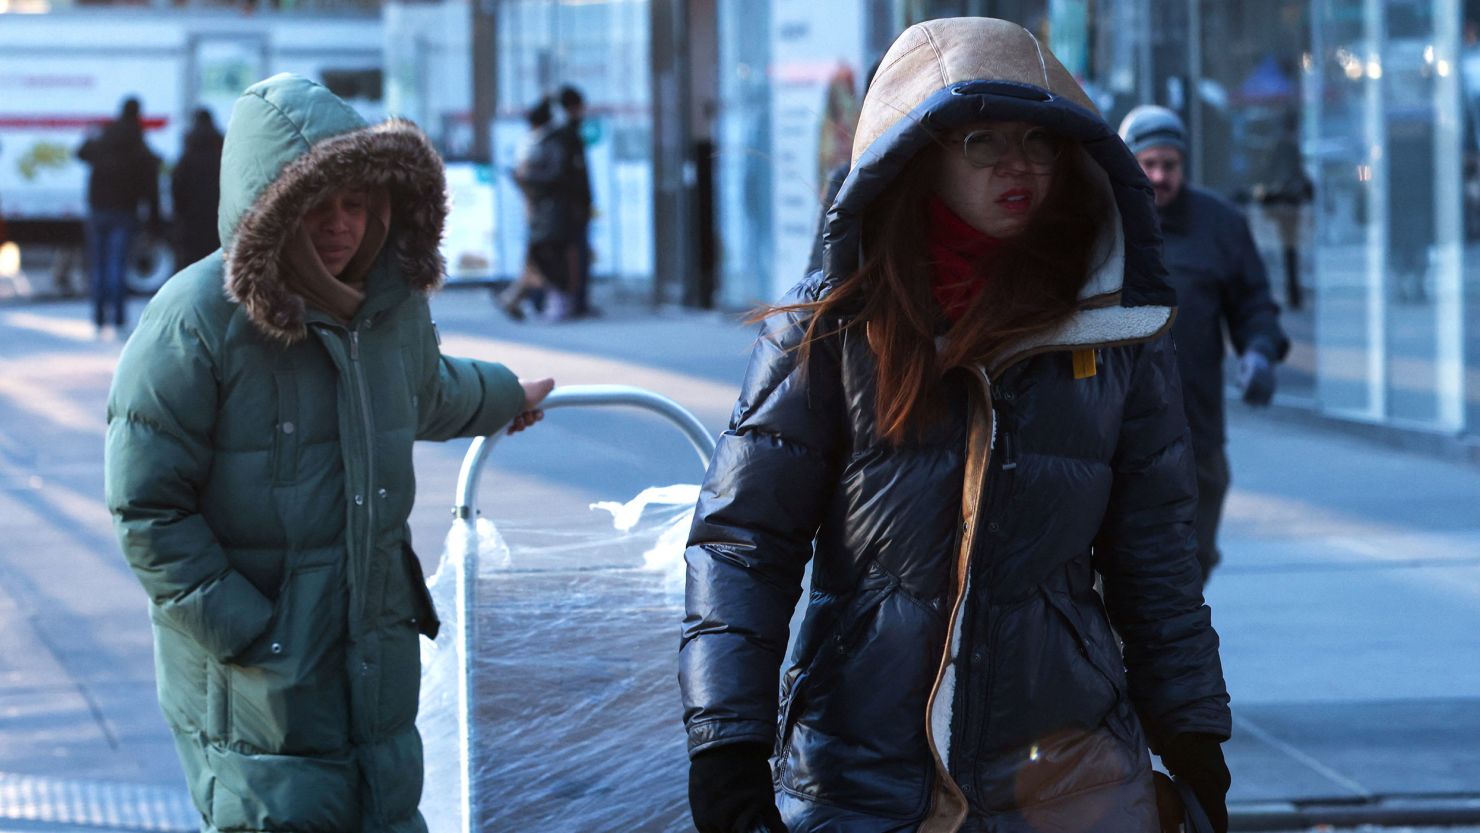 People bundled up against winter weather as they made their way through midtown Manhattan Friday, February 3, while bitter cold temperatures moved into much of the Northeast.